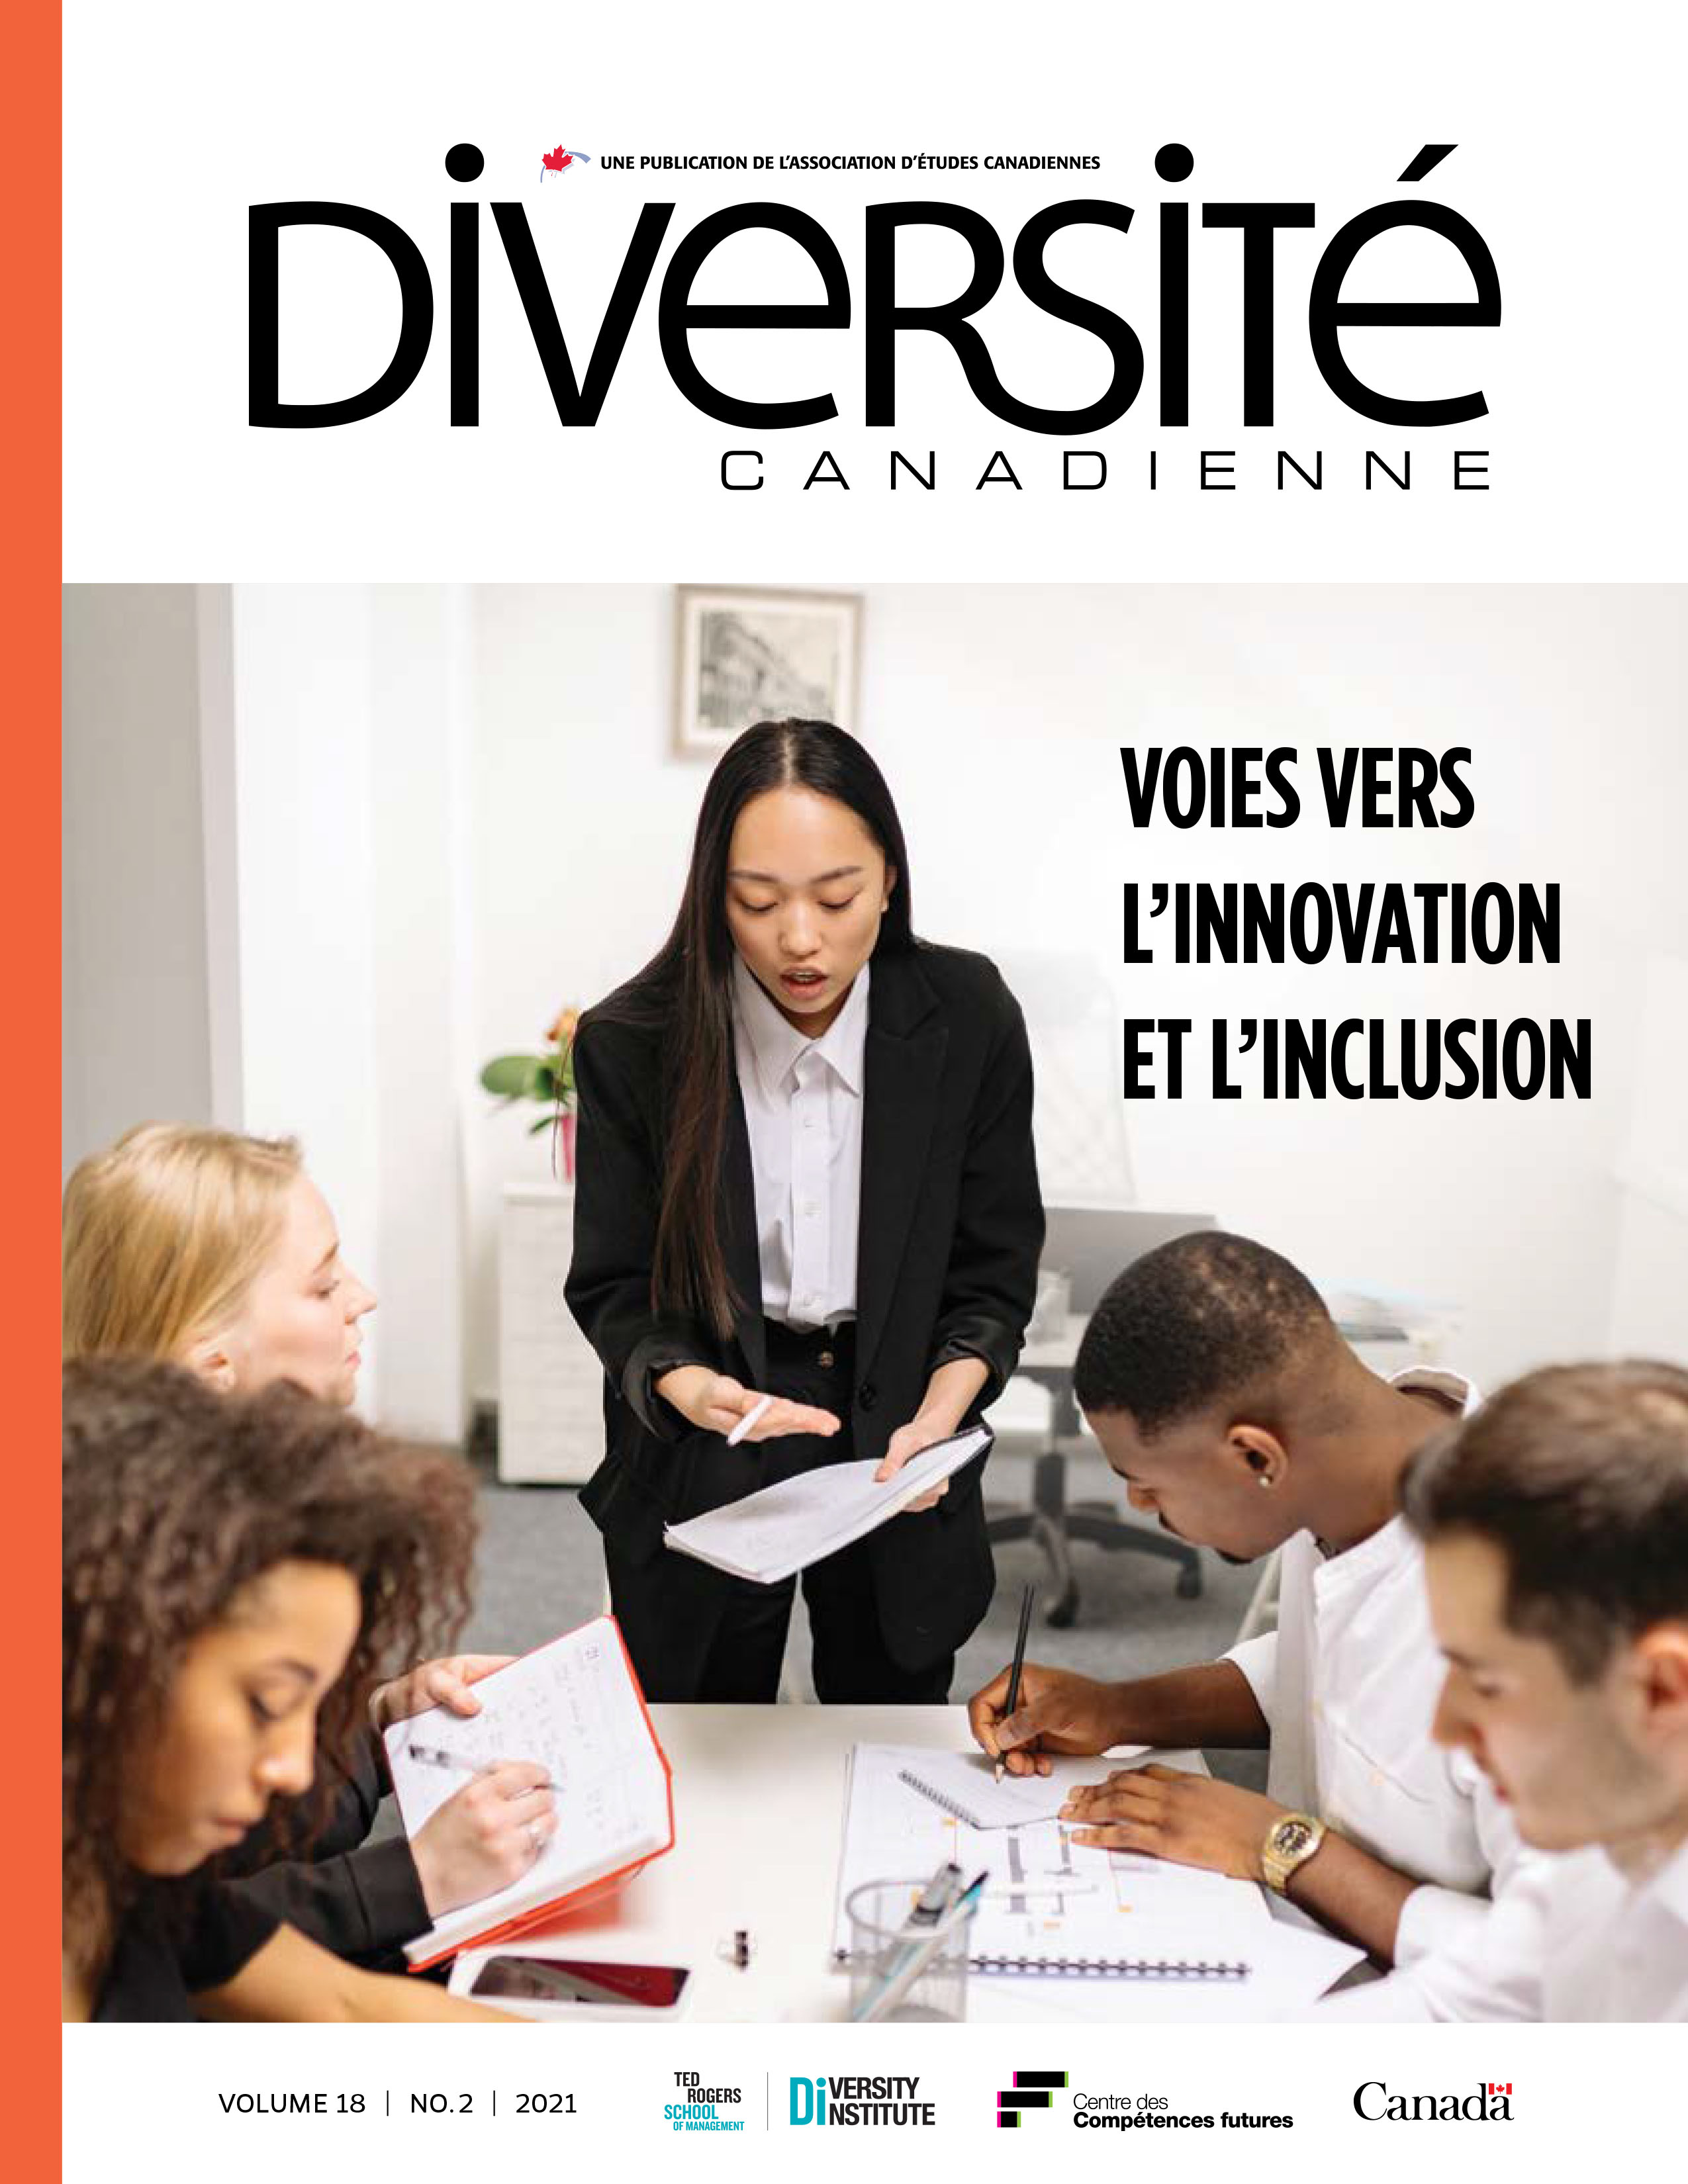 Canadian Diversity magazine cover with headline "Pathways to Innovation and Inclusion"